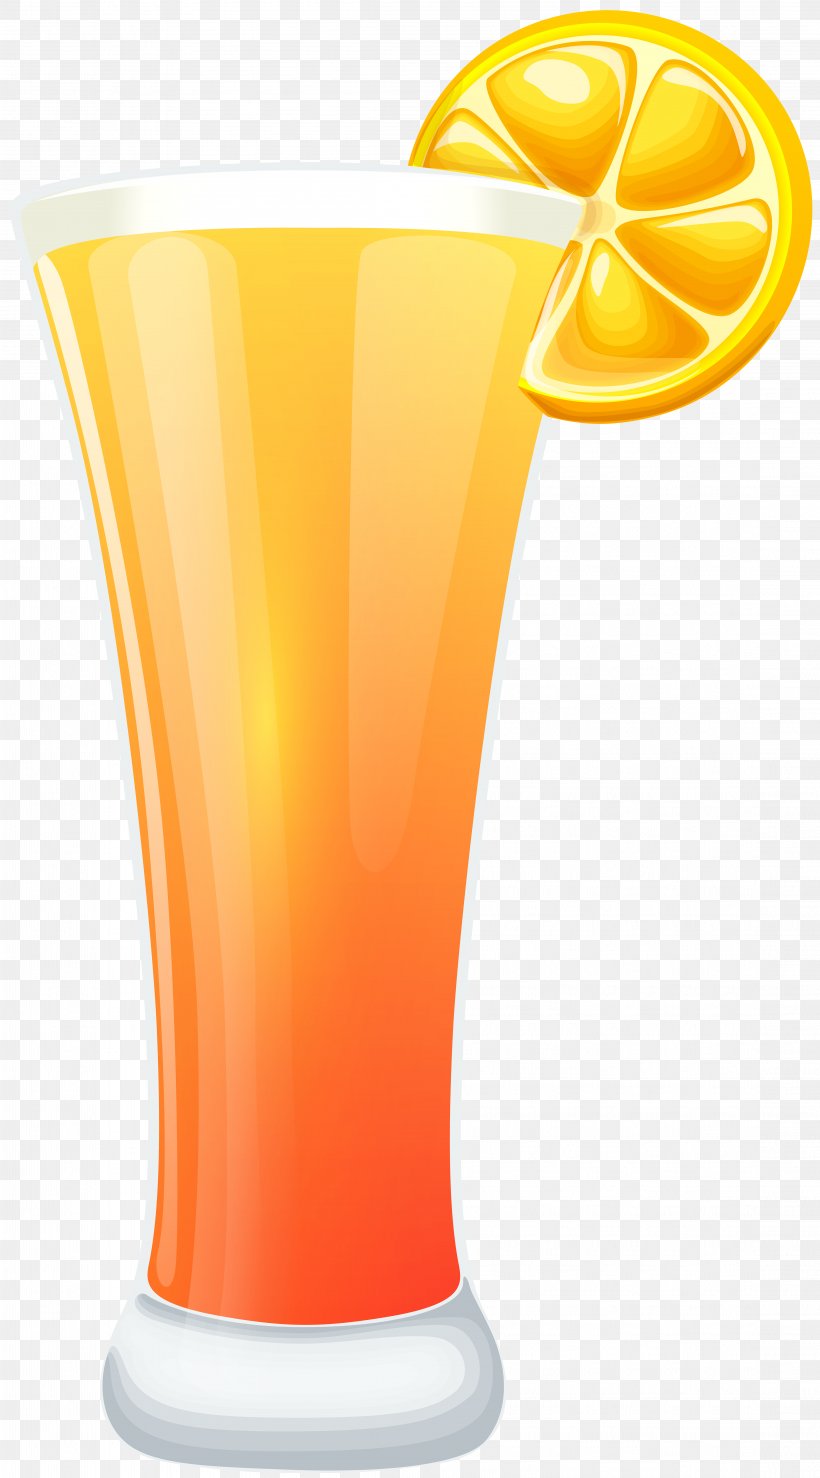 Ready-to-Use Art Nouveau Initials Clip Art, PNG, 4436x8000px, Orange Juice, Beer Glass, Beer Glasses, Cocktail, Cocktail Garnish Download Free